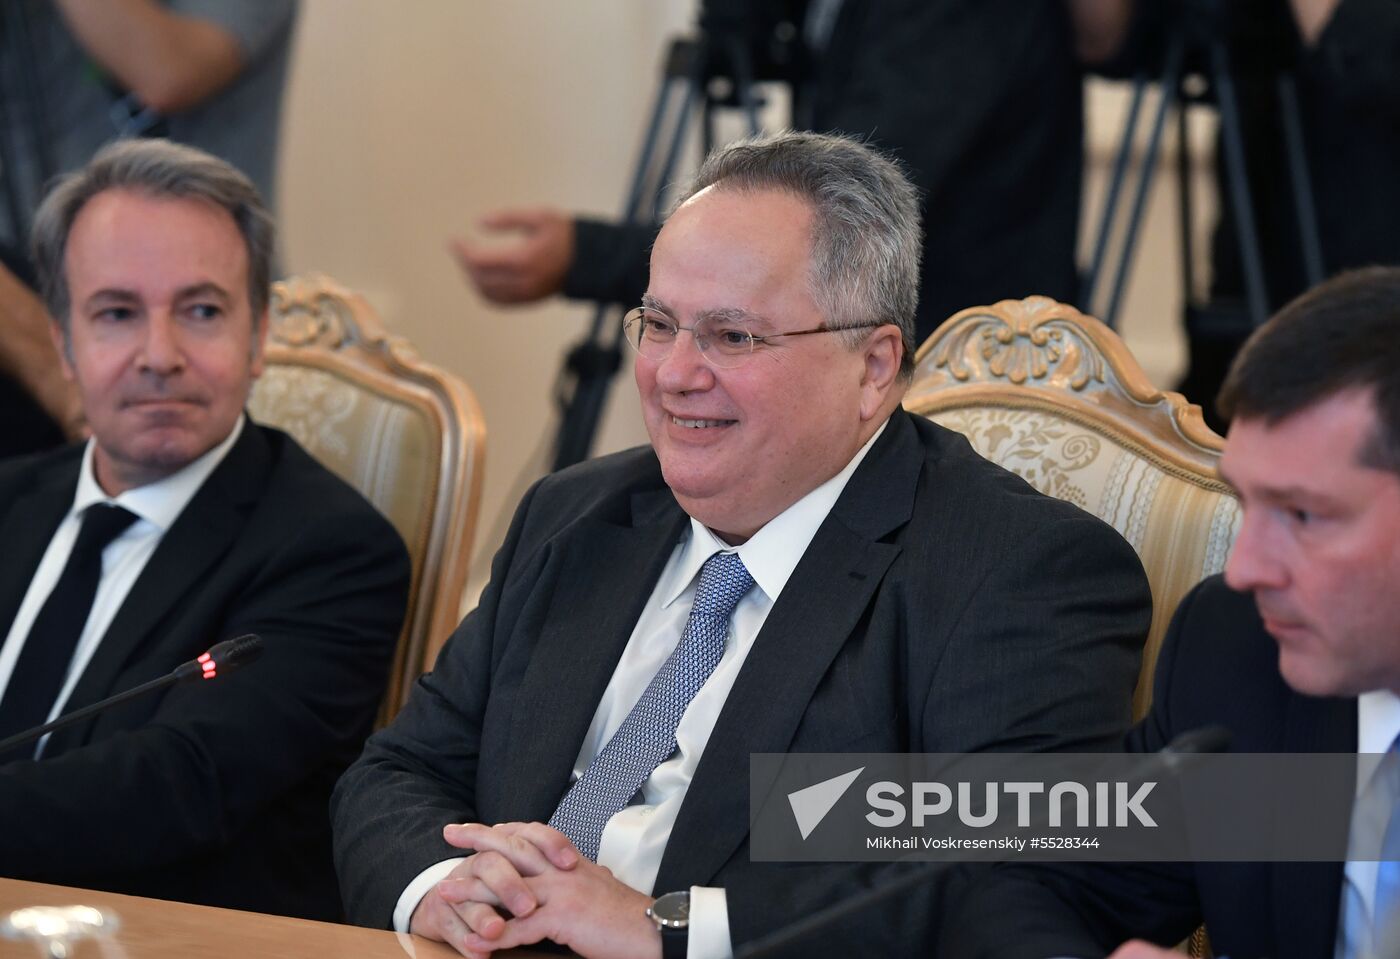 Meeting of Russian and Greek foreign ministers